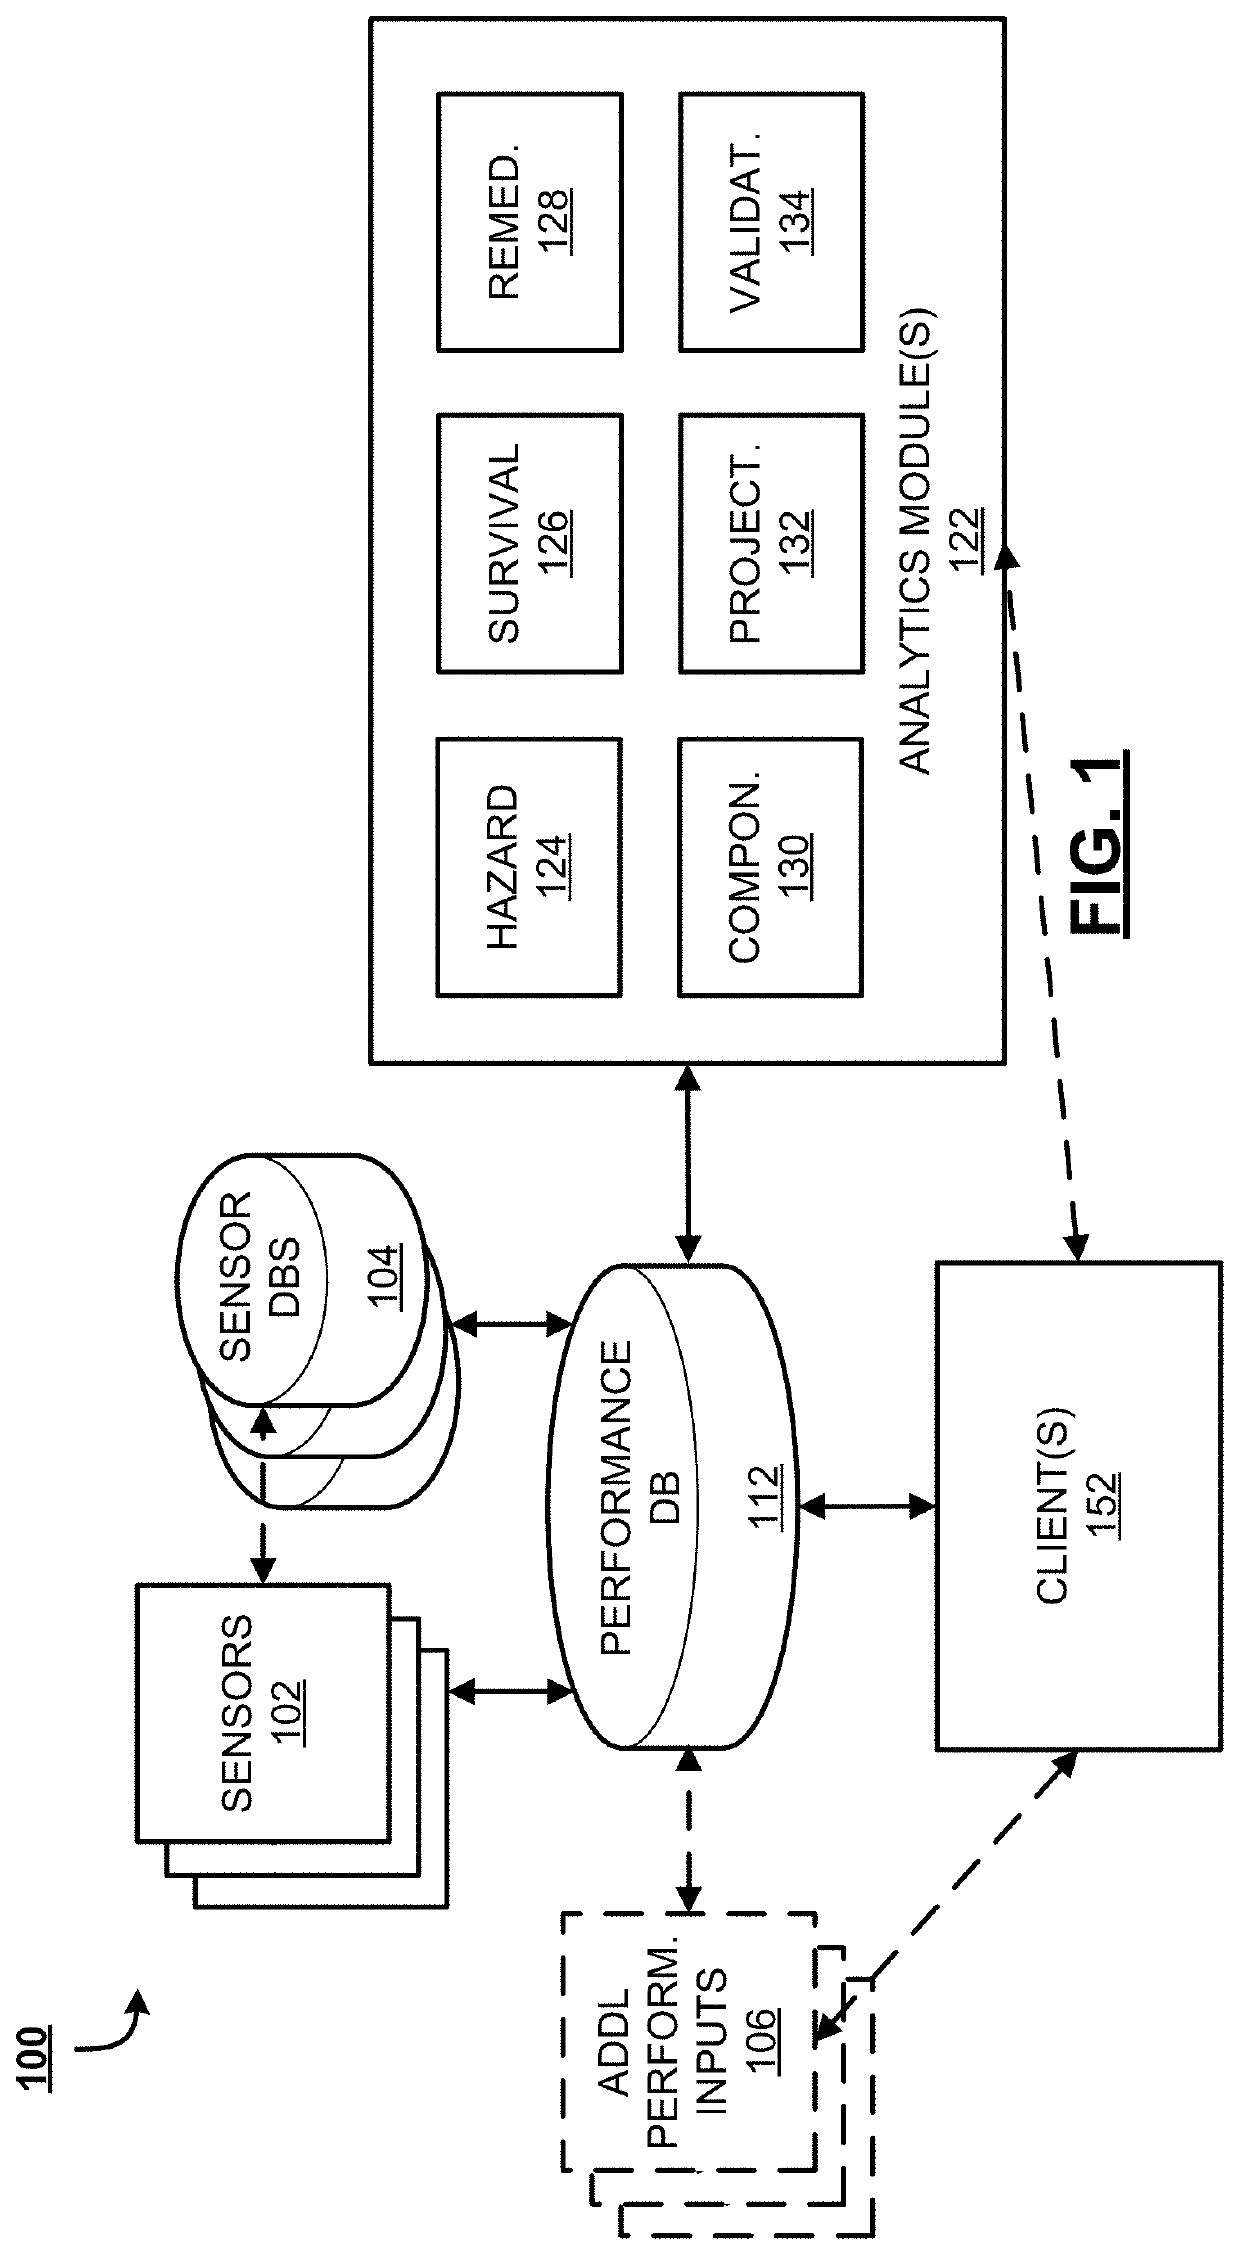 Systems and methods for anomaly detection and survival analysis for physical assets